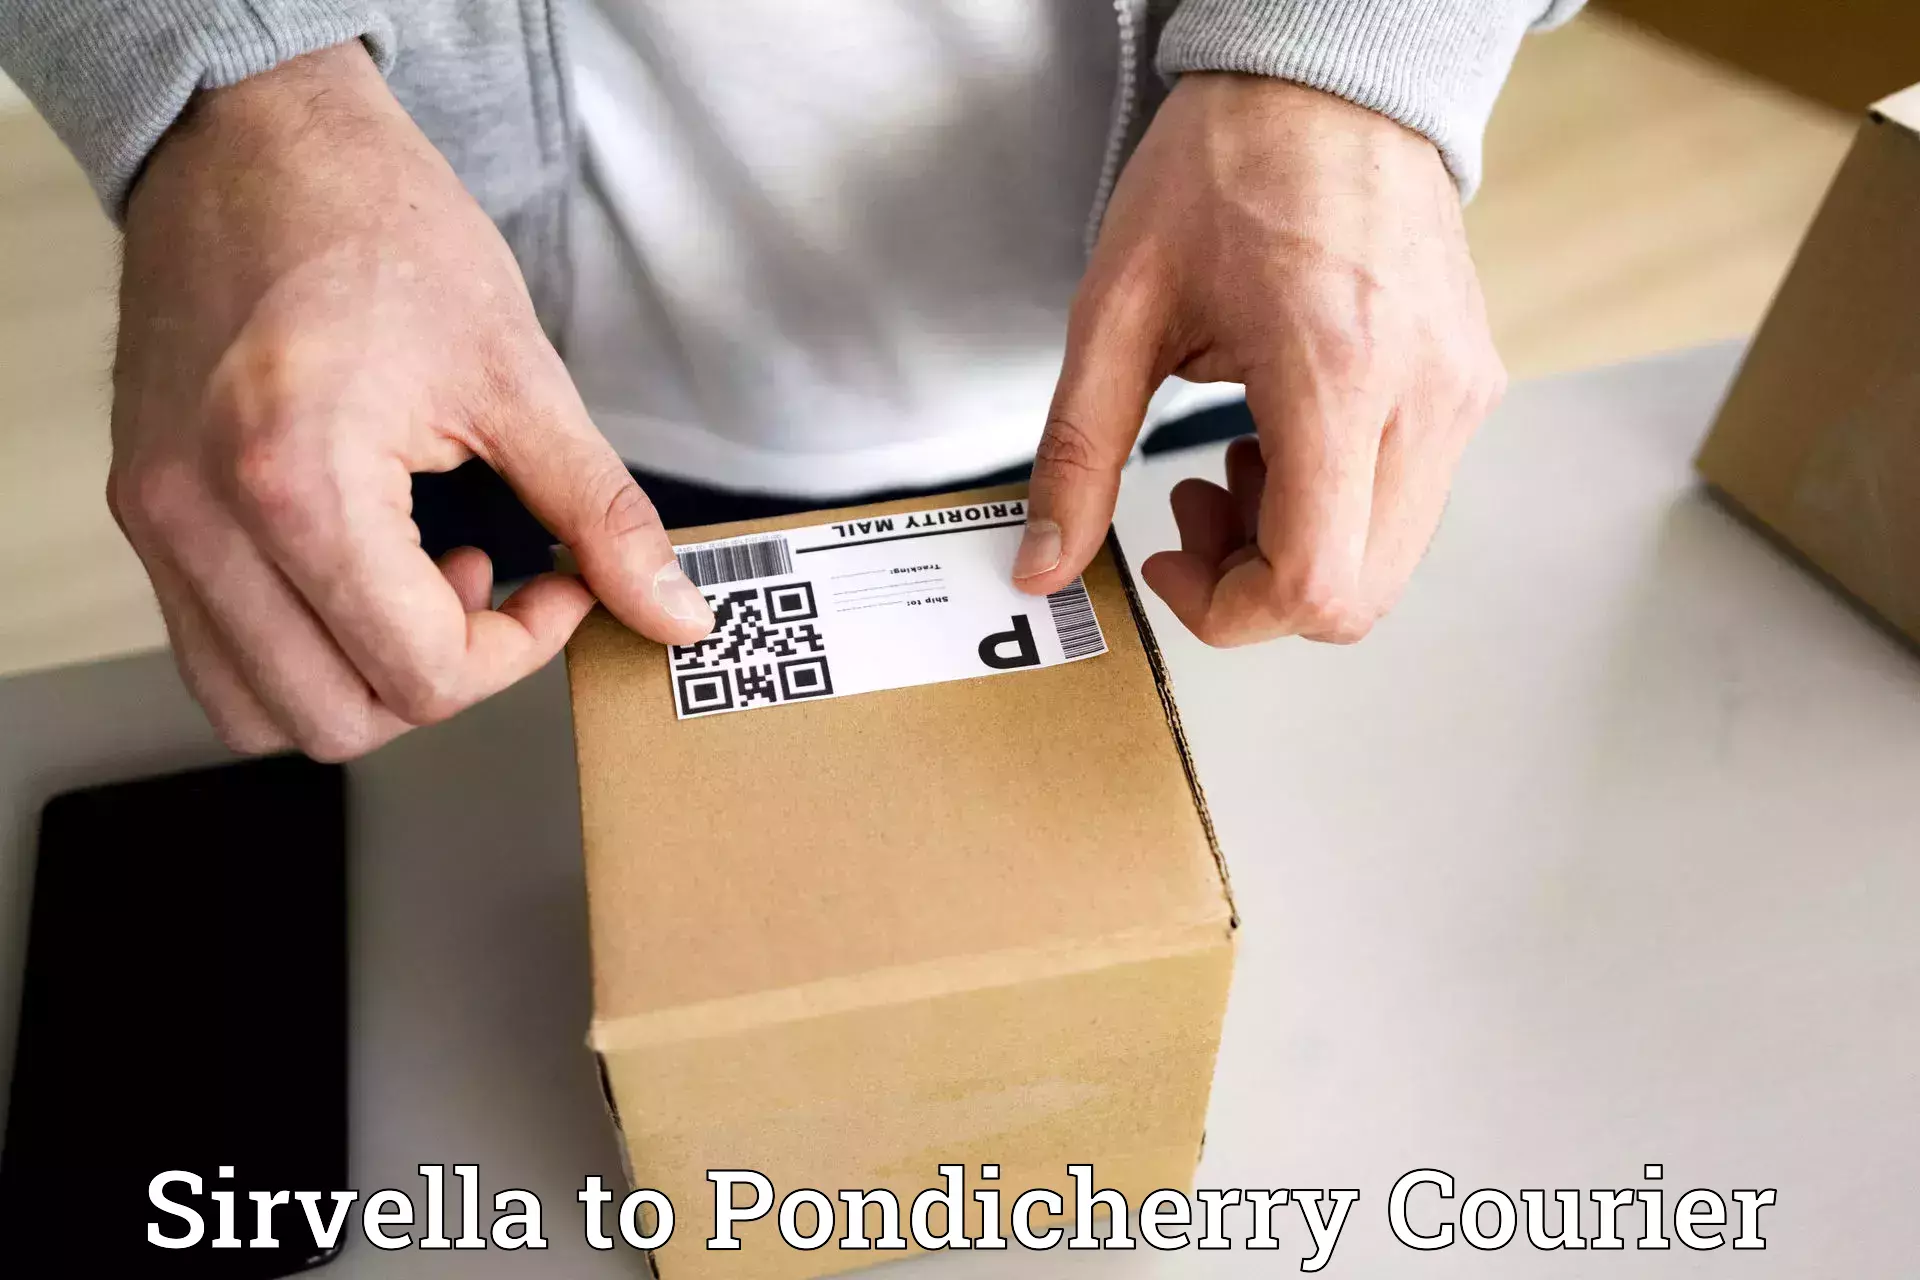 Flexible delivery schedules in Sirvella to Pondicherry